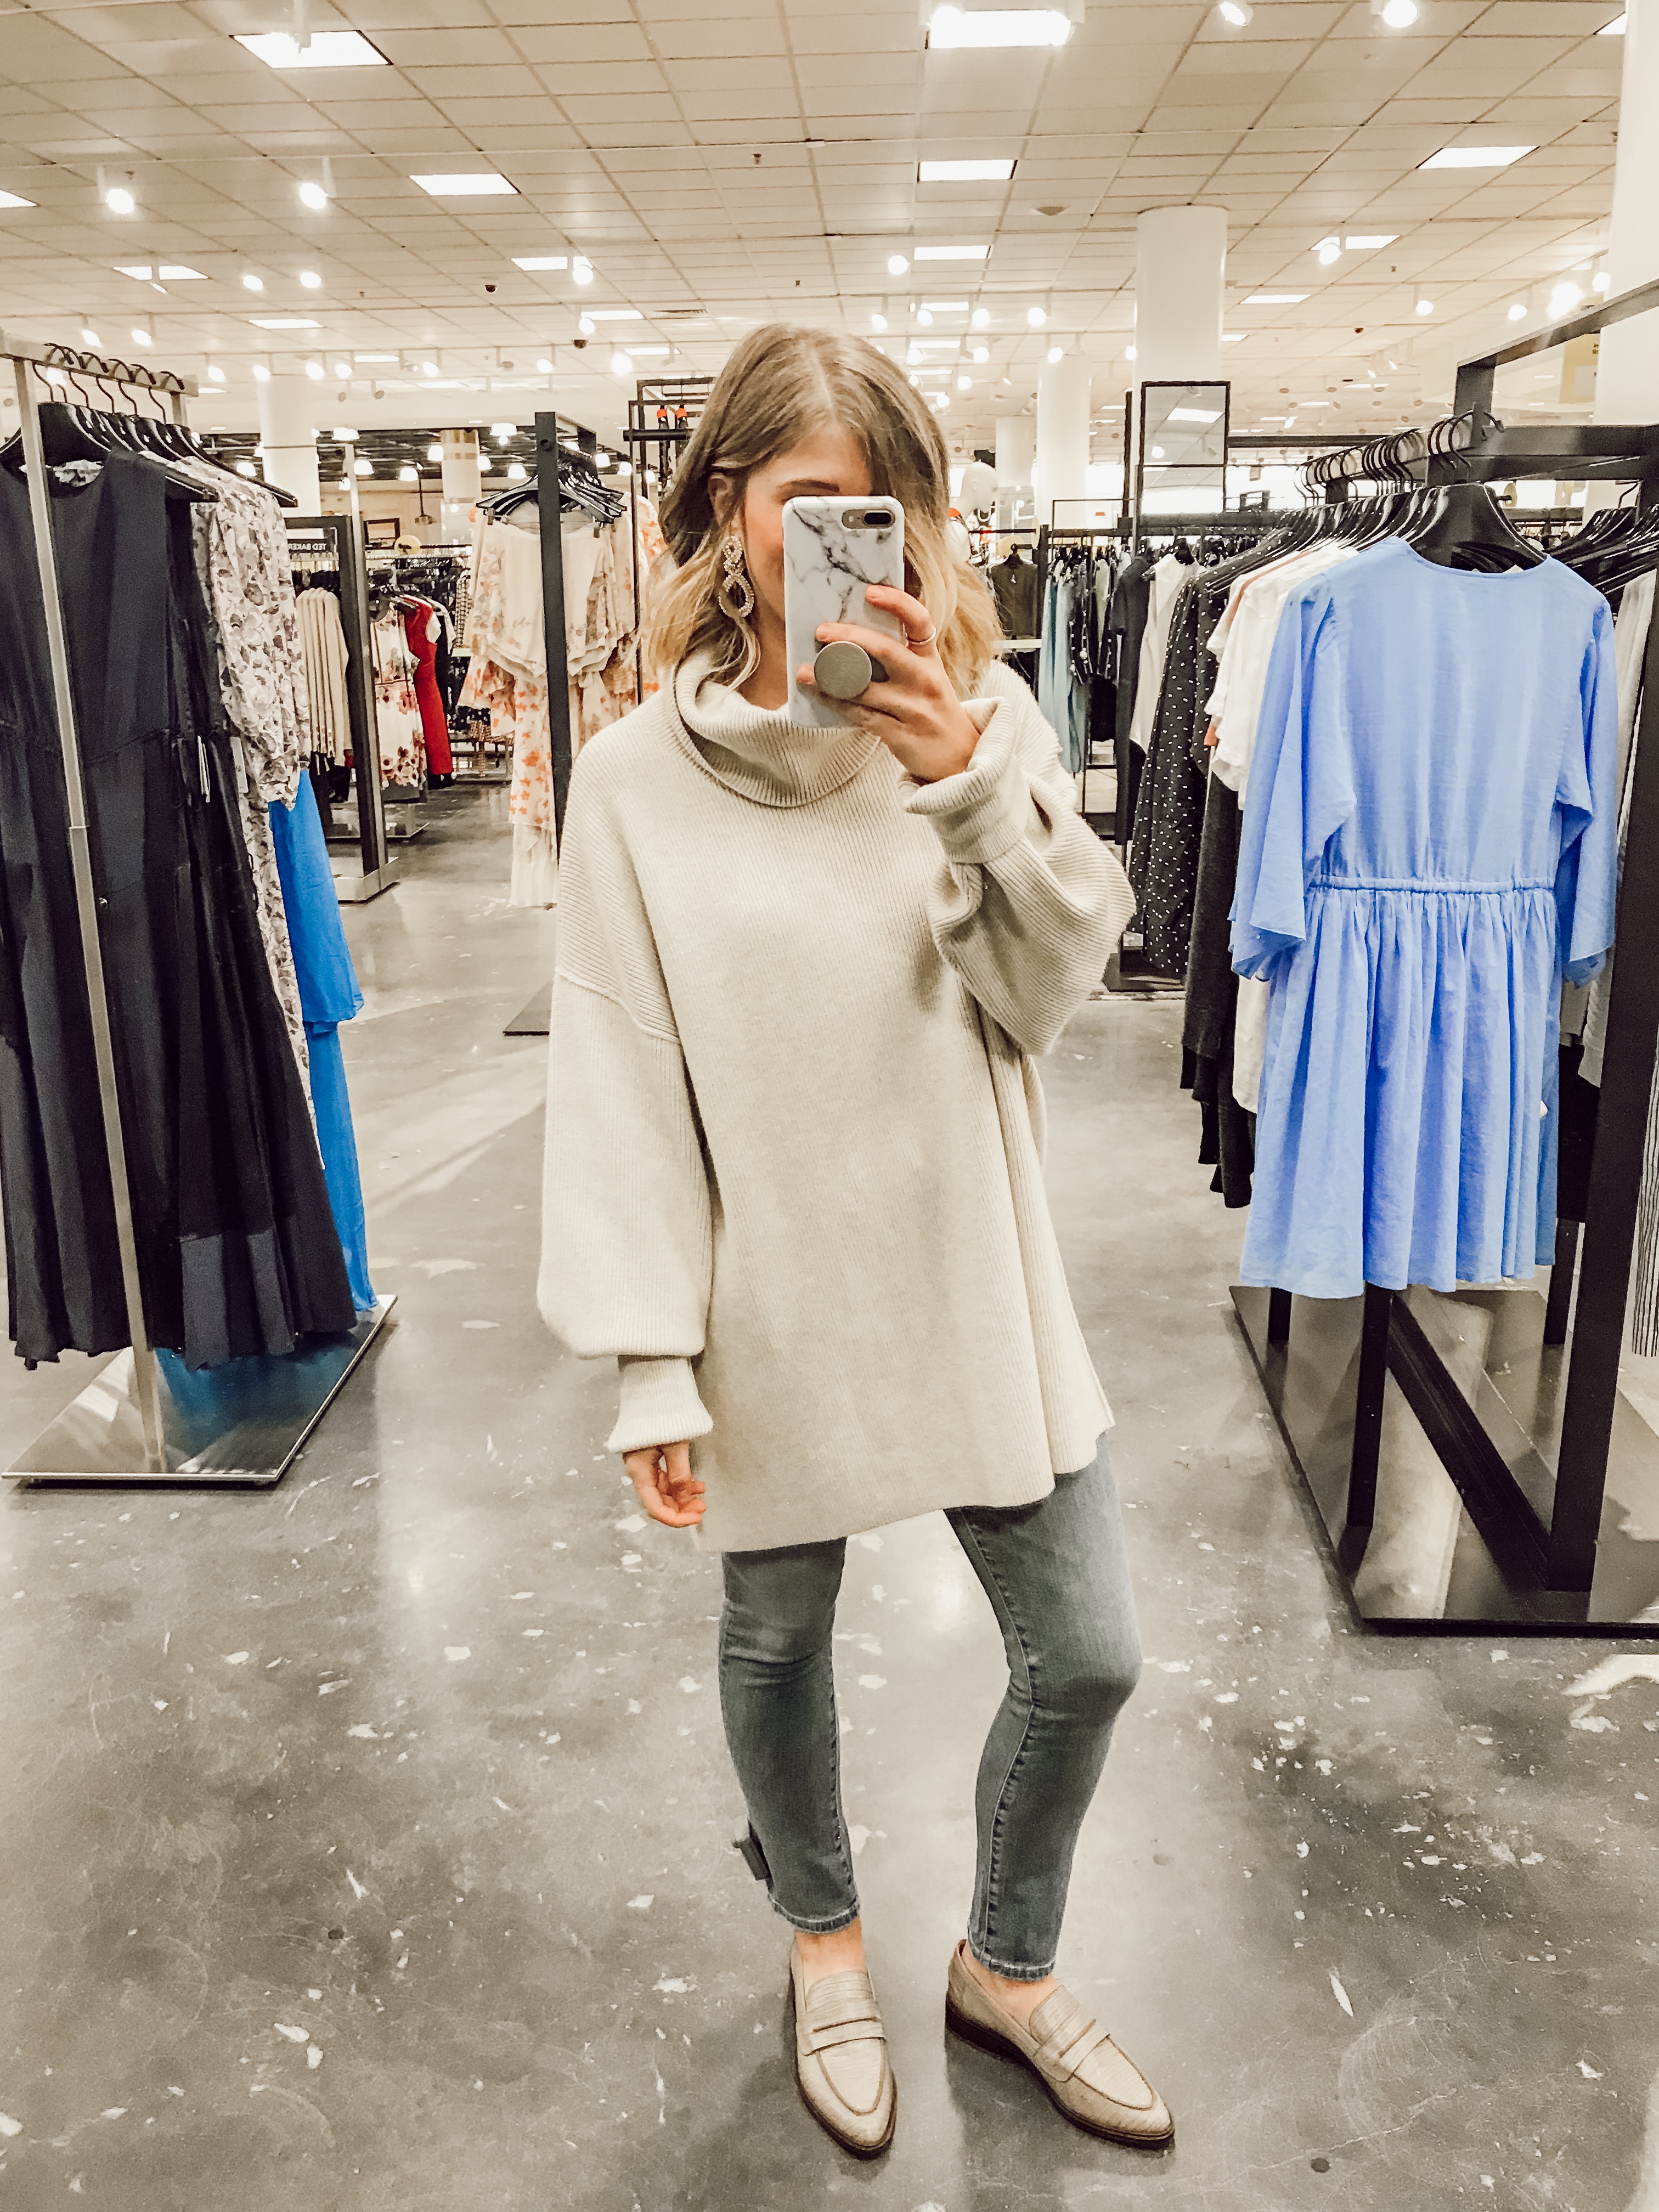 Free People Softly Structured Knit Tunic Sweater | 2019 Nordstrom Anniversary Fitting Room Session featured on Louella Reese Life & Style Blog